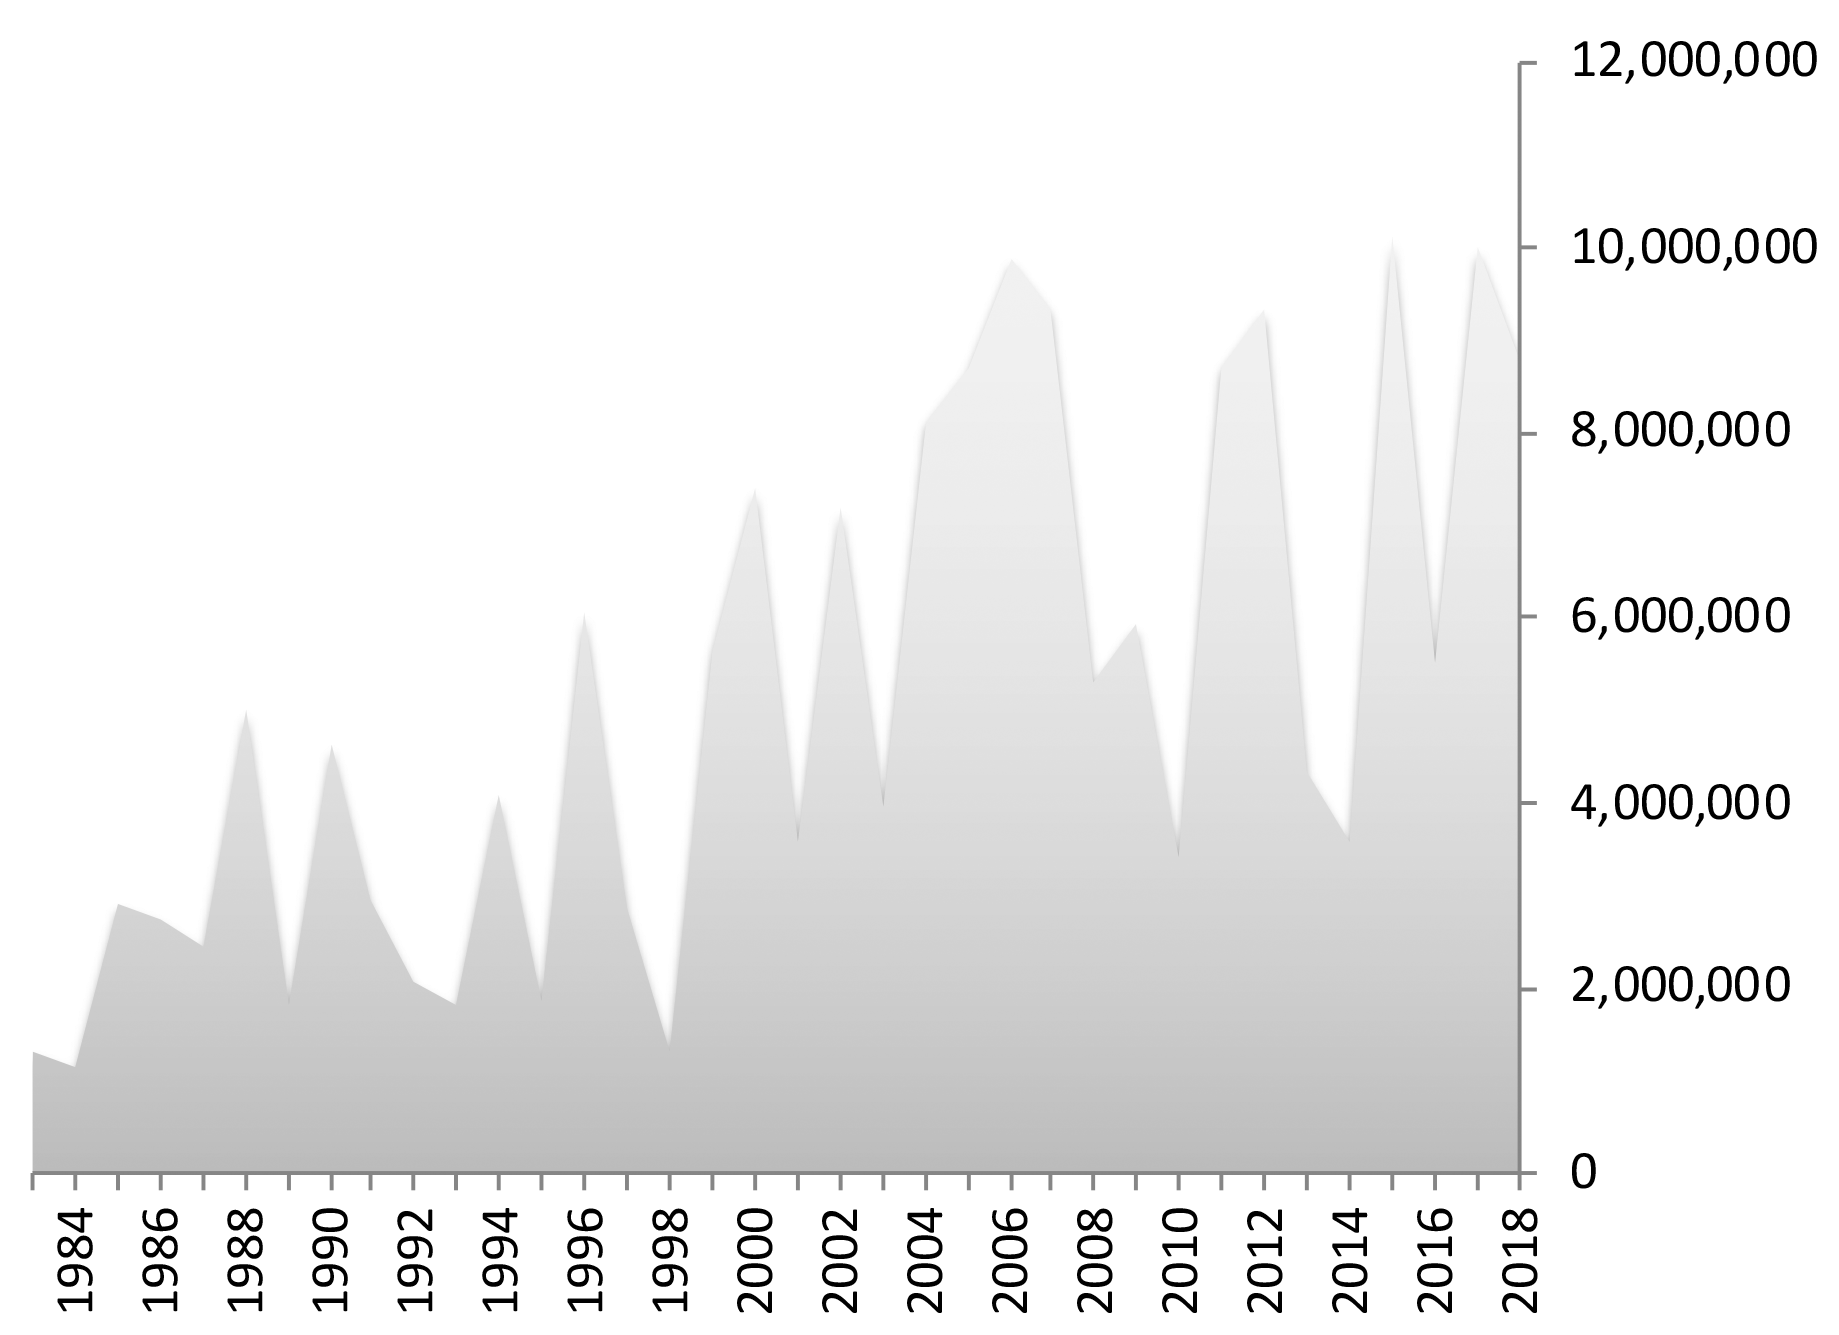 Total acres burned by wildland fire, 1983-2018.